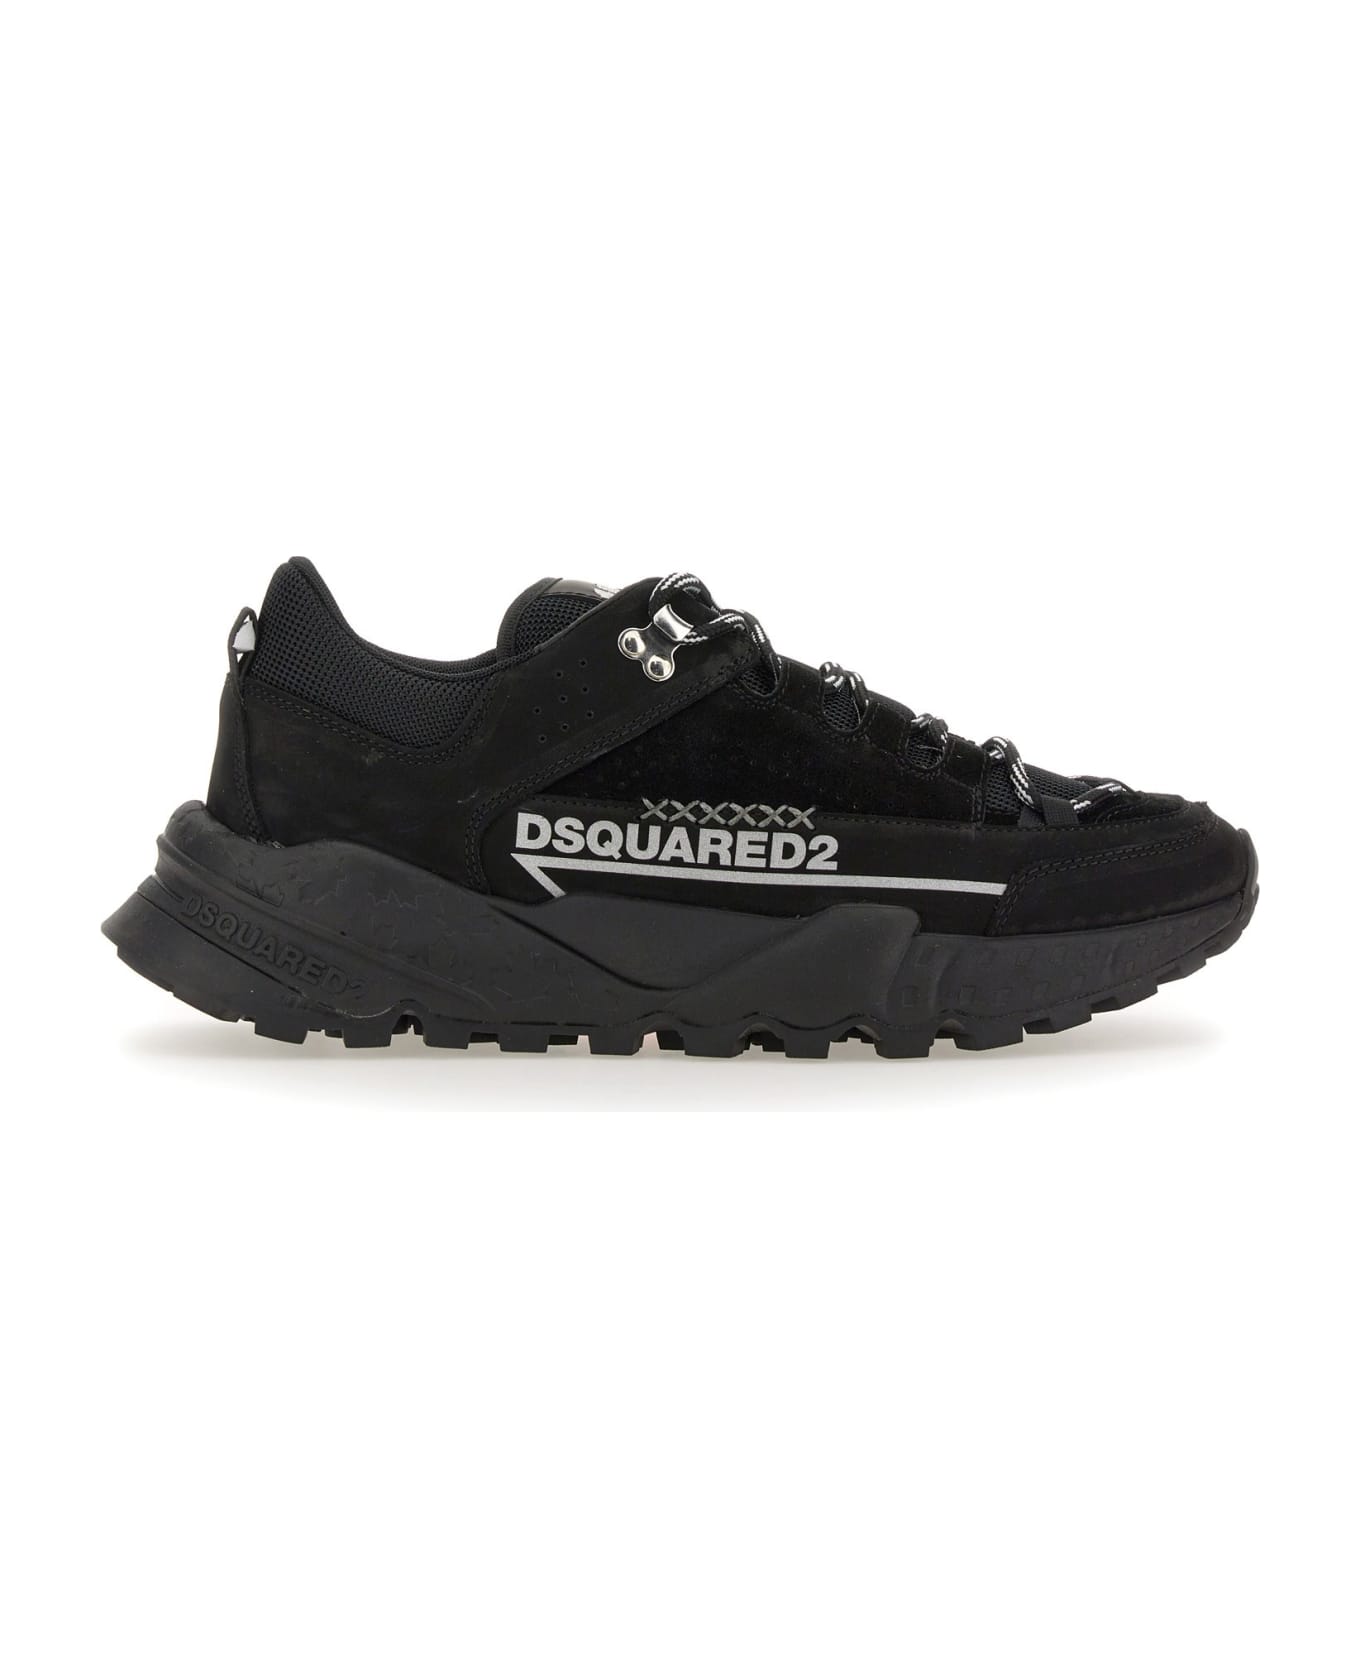 Dsquared2 Free Lace-up Low Top Sneakers - Black スニーカー